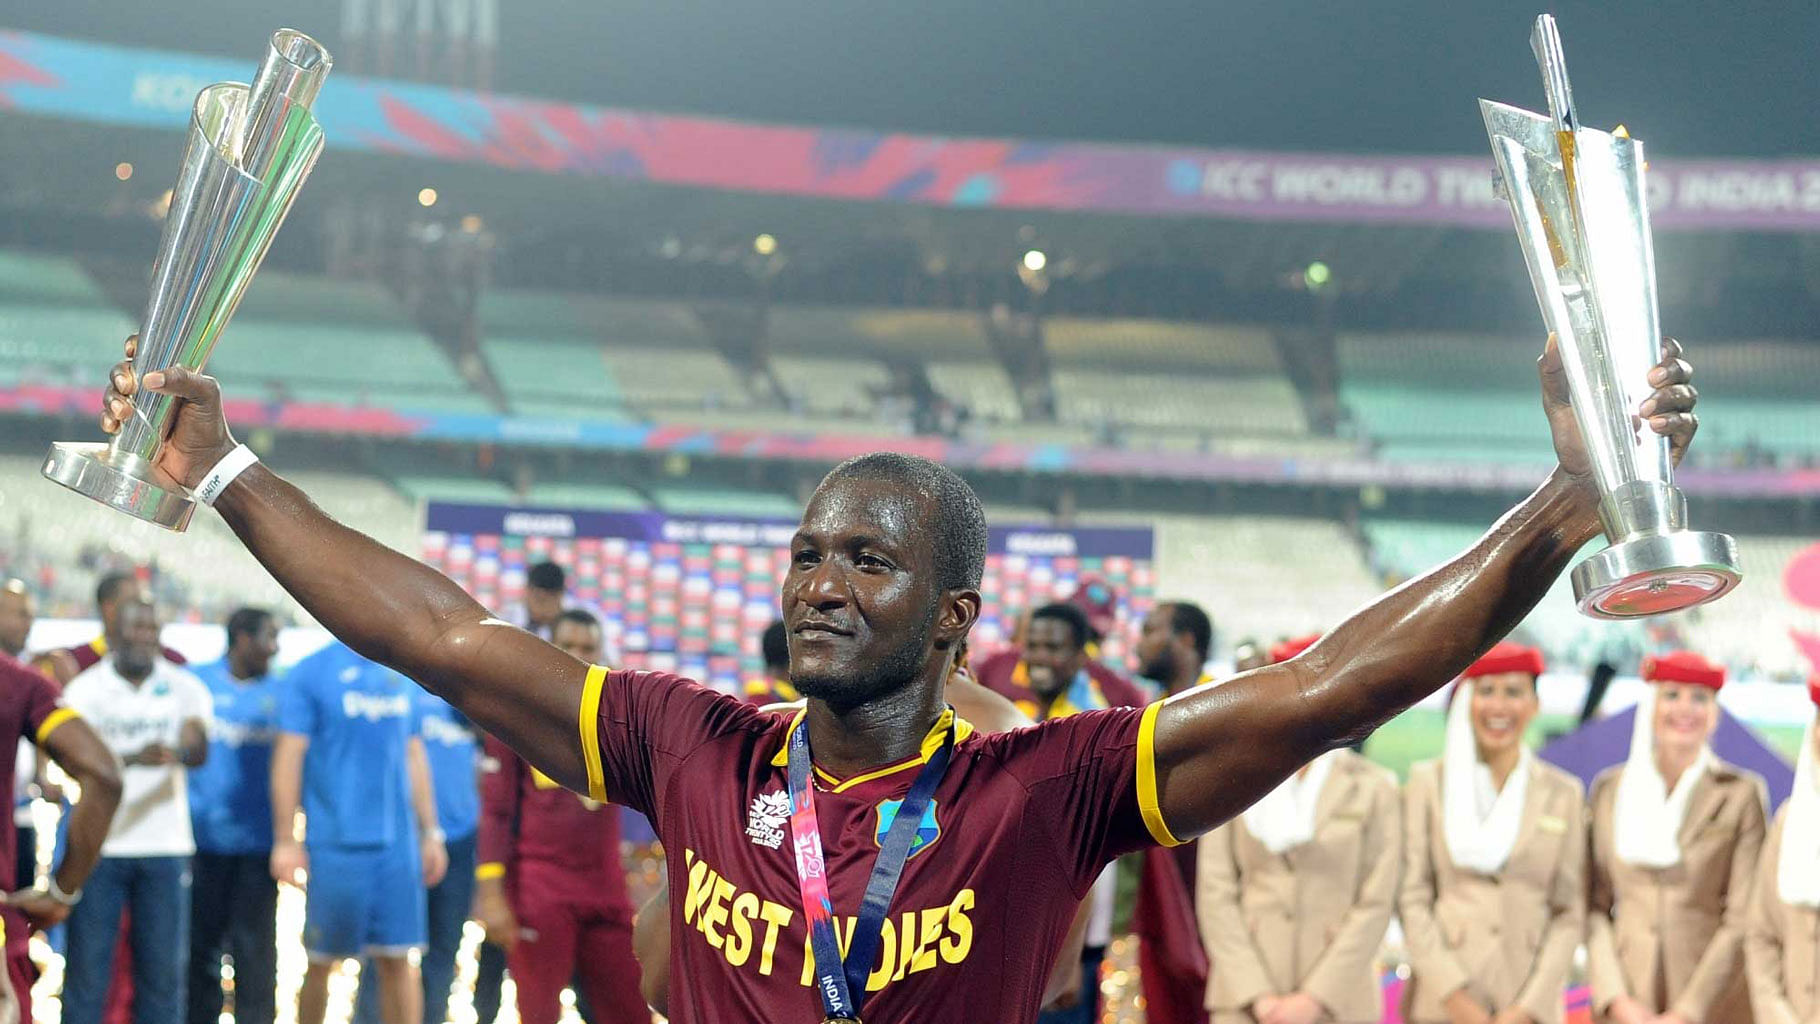 Two-time T-20 World Cup winning skipper, Darren Sammy, has been sacked as Captain of West Indies. (Photo: IANS)